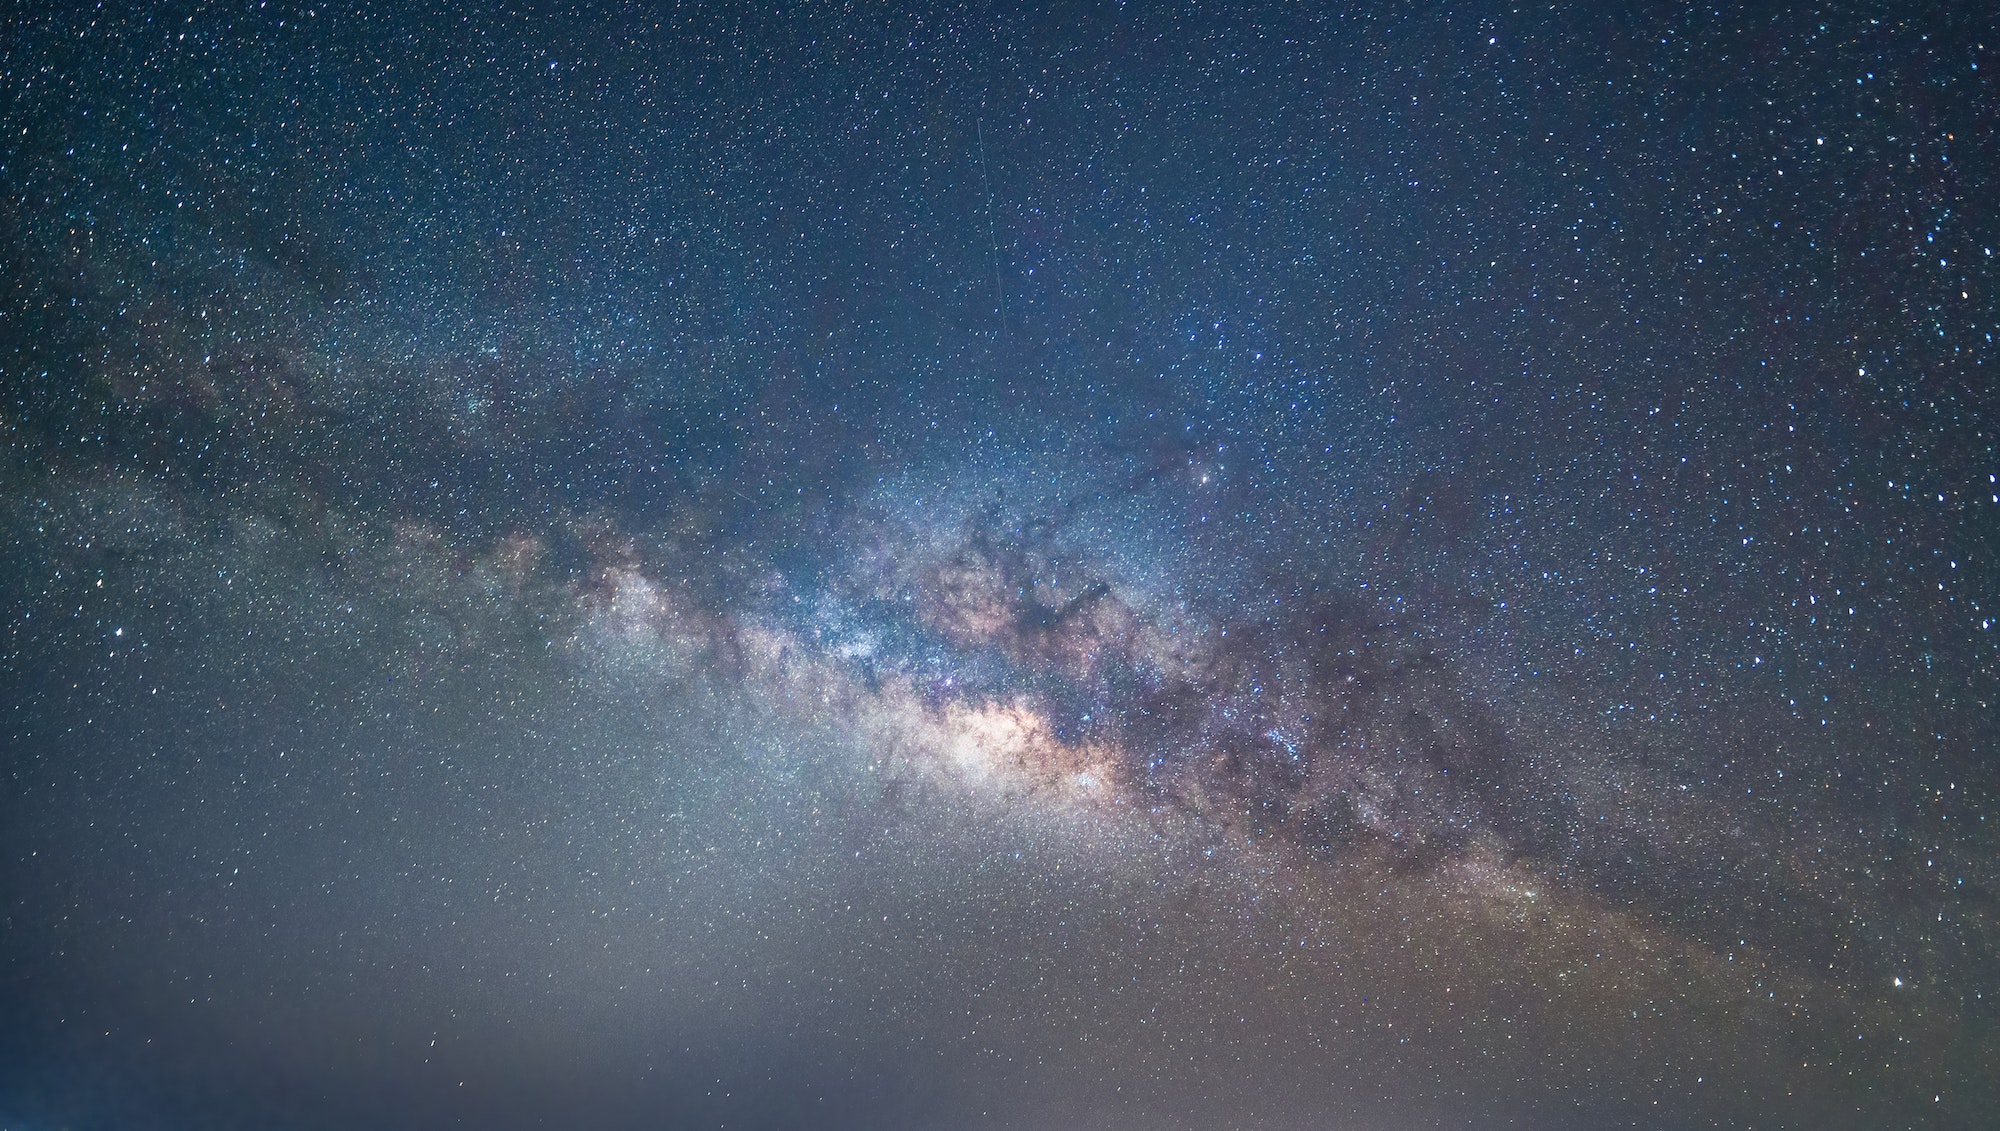 Milky way at night. Natural universe space landscape. Galaxy that contains our Solar System